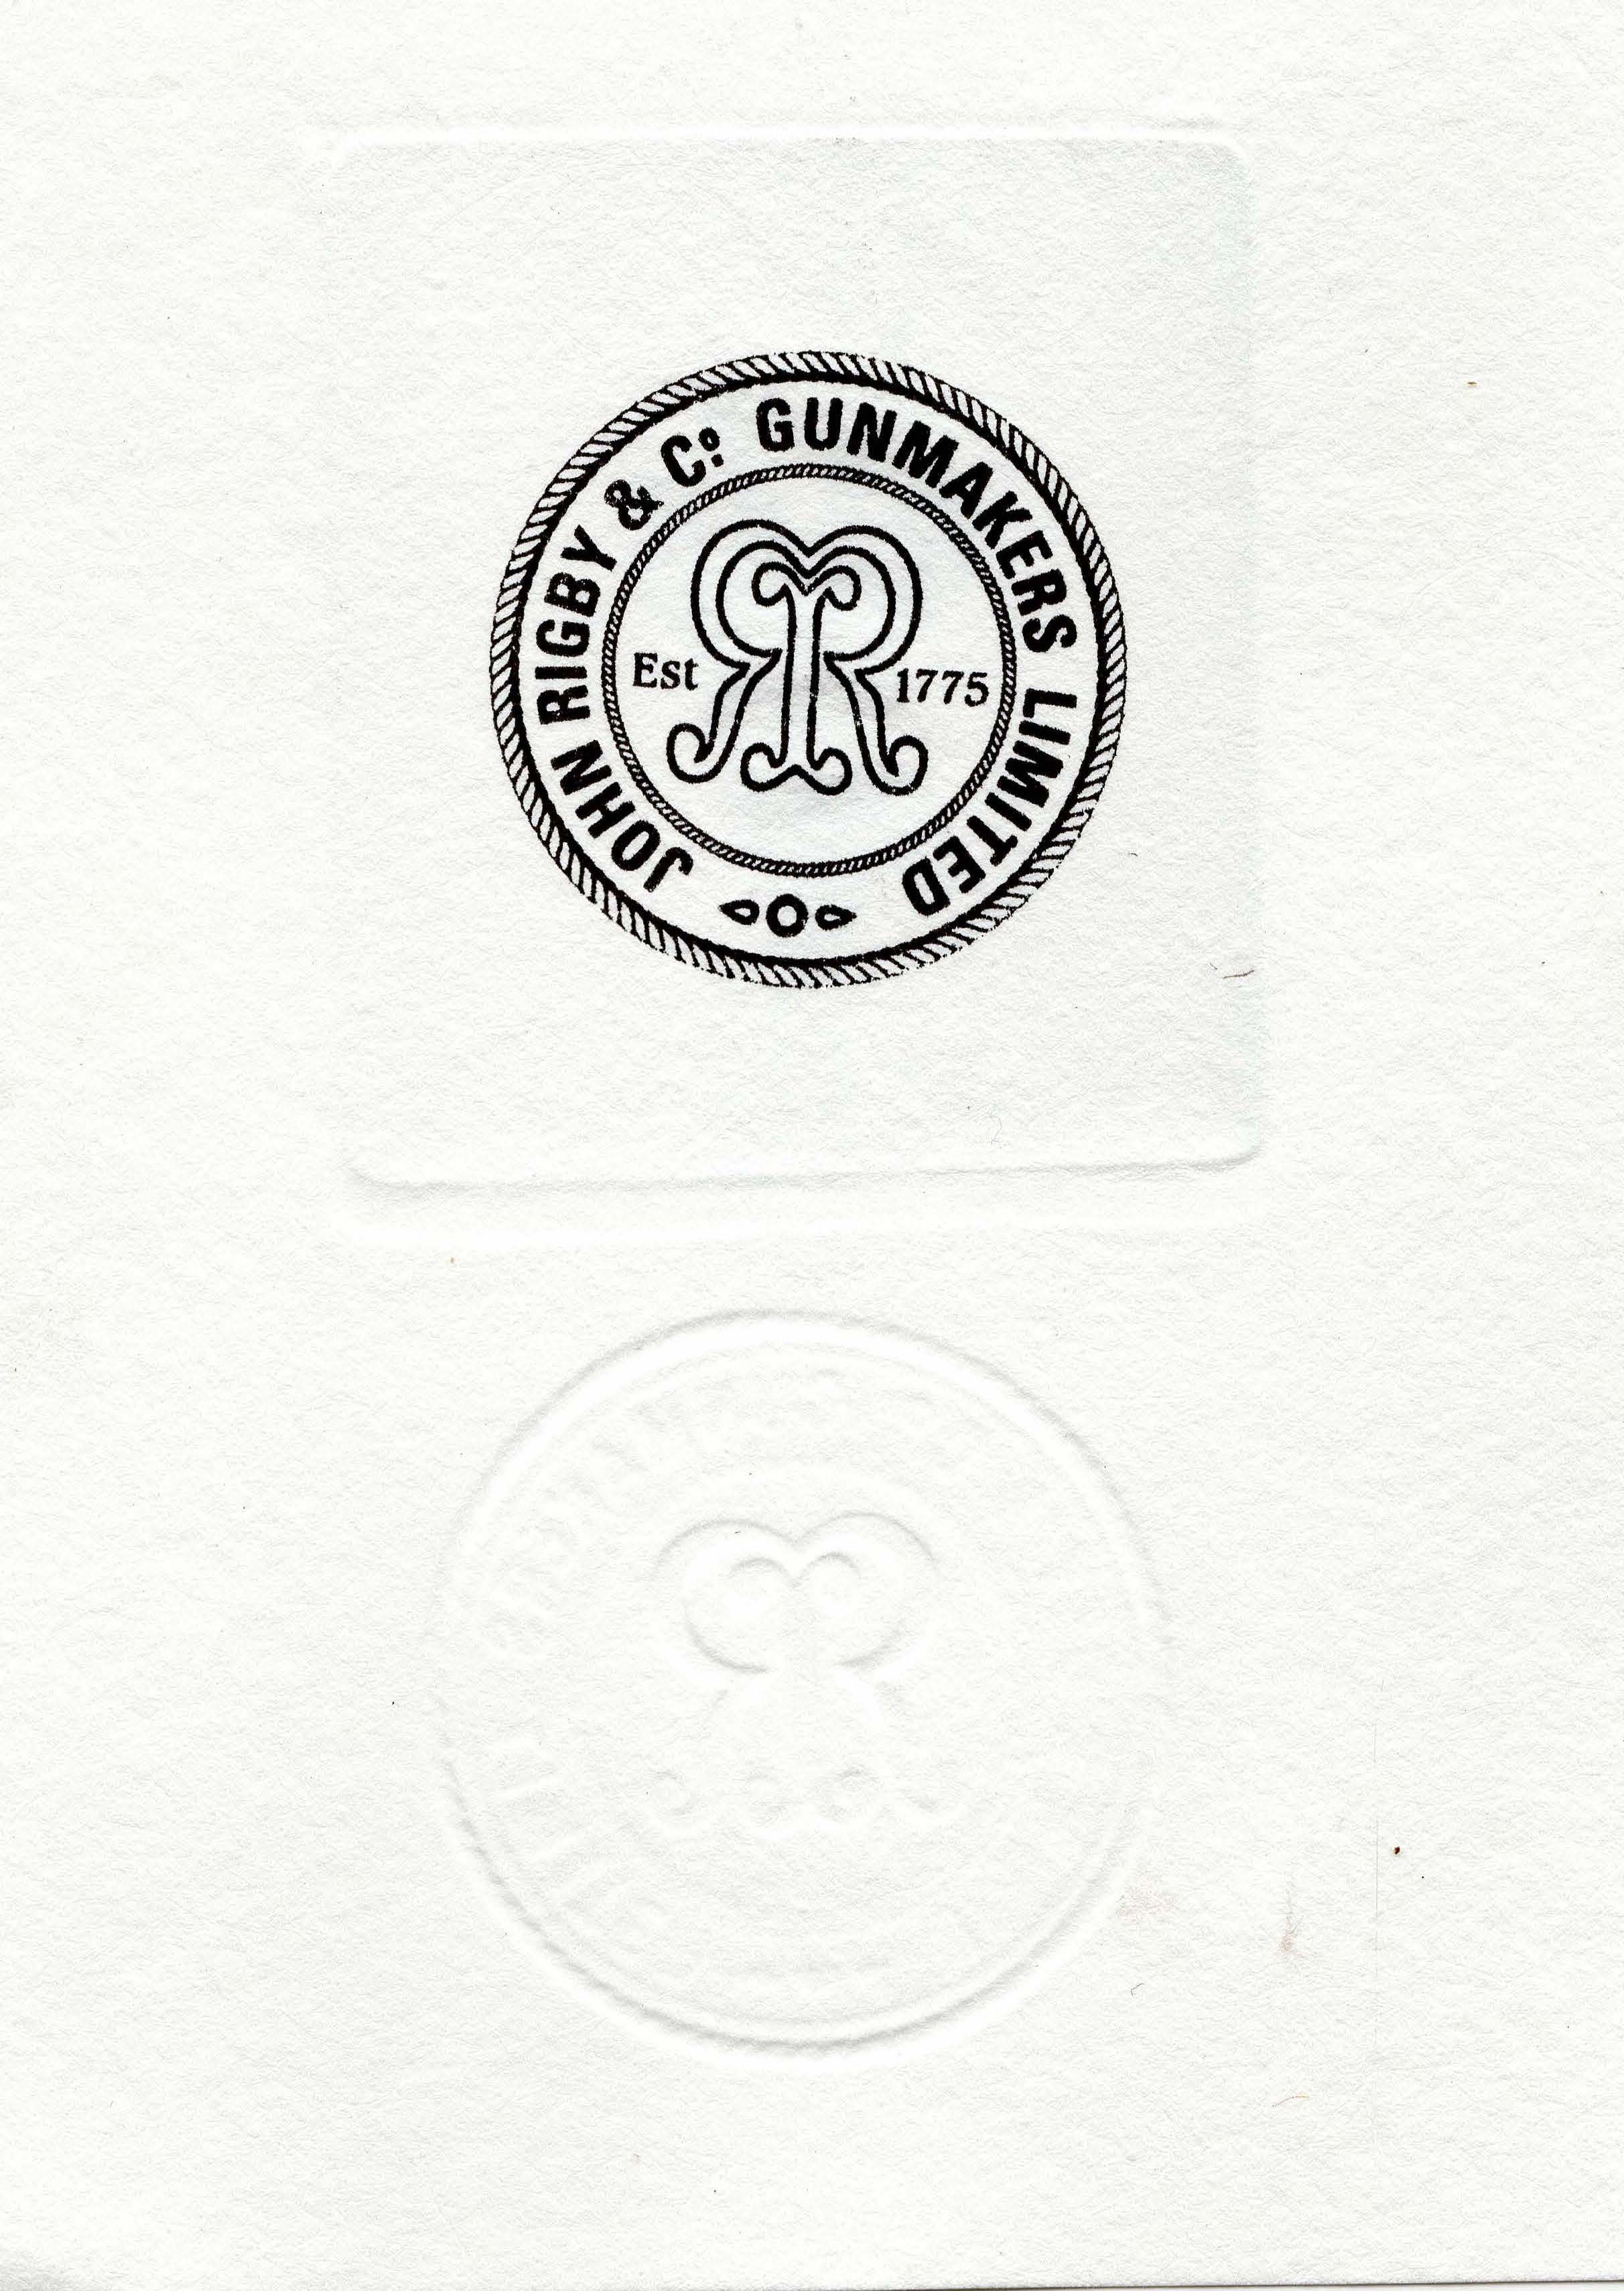 the john rigby & Co stamp